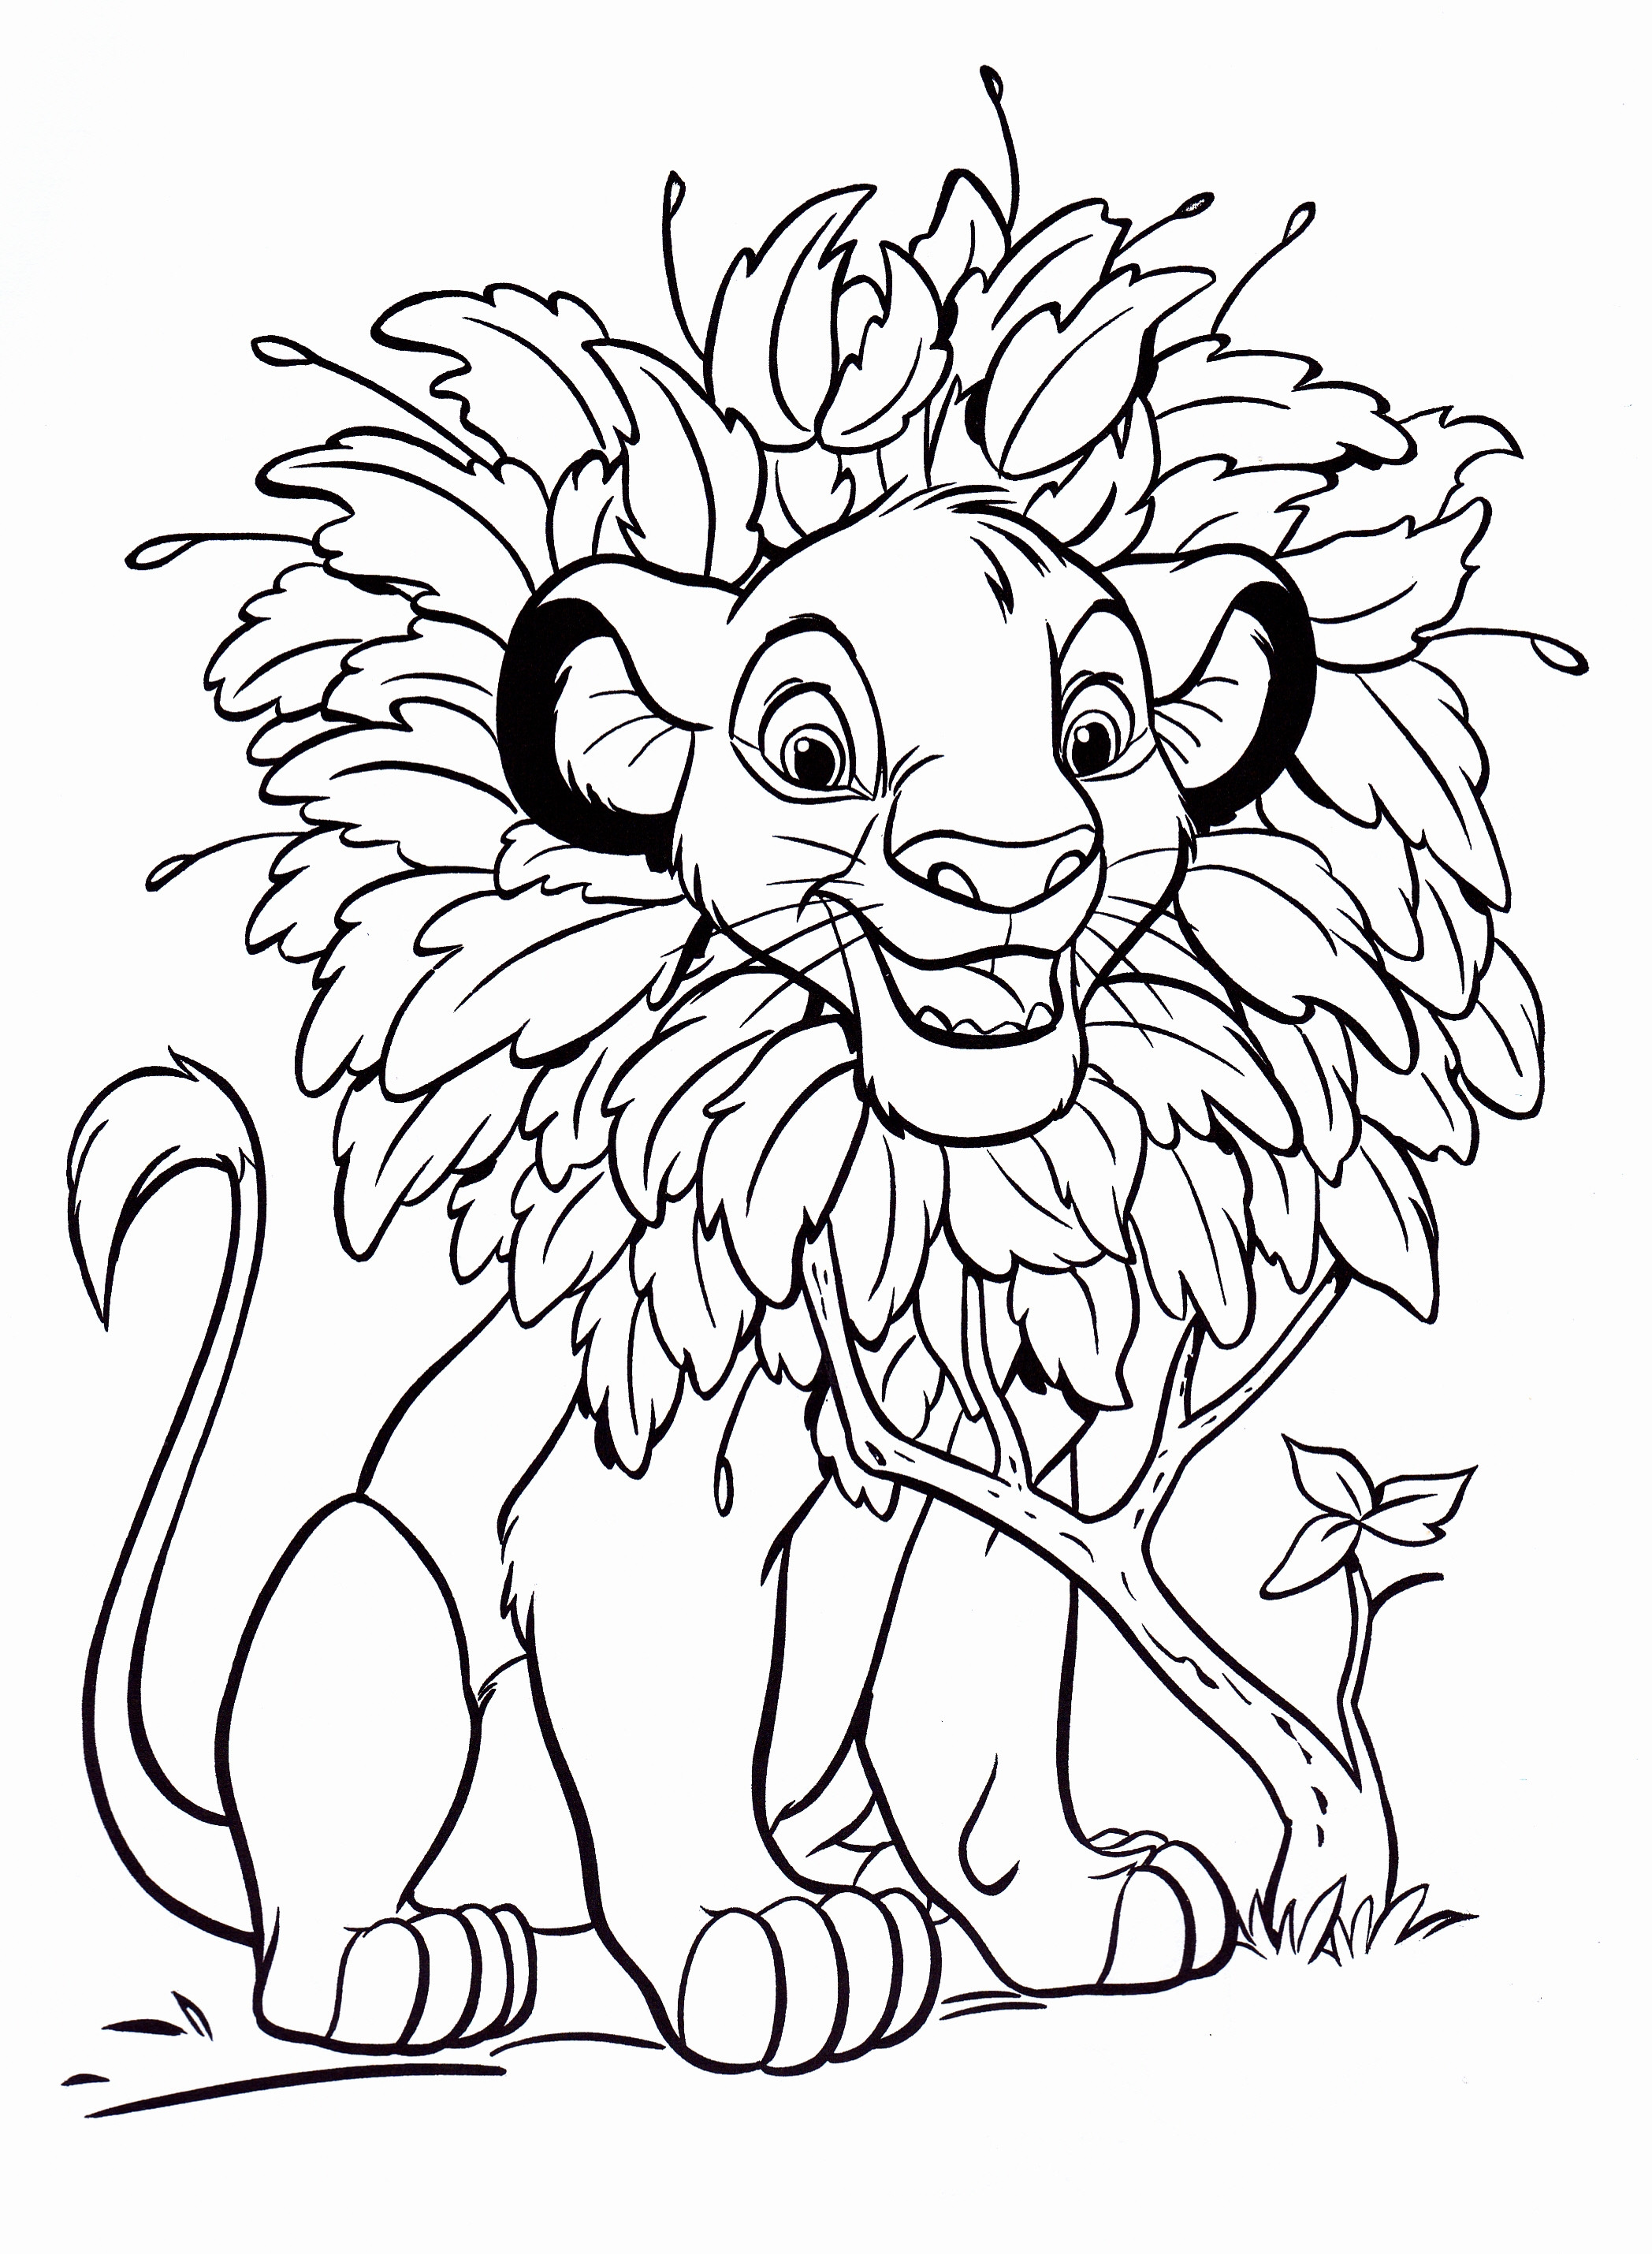 Printable Coloring Pages For Toddlers Free
 Free Printable Simba Coloring Pages For Kids